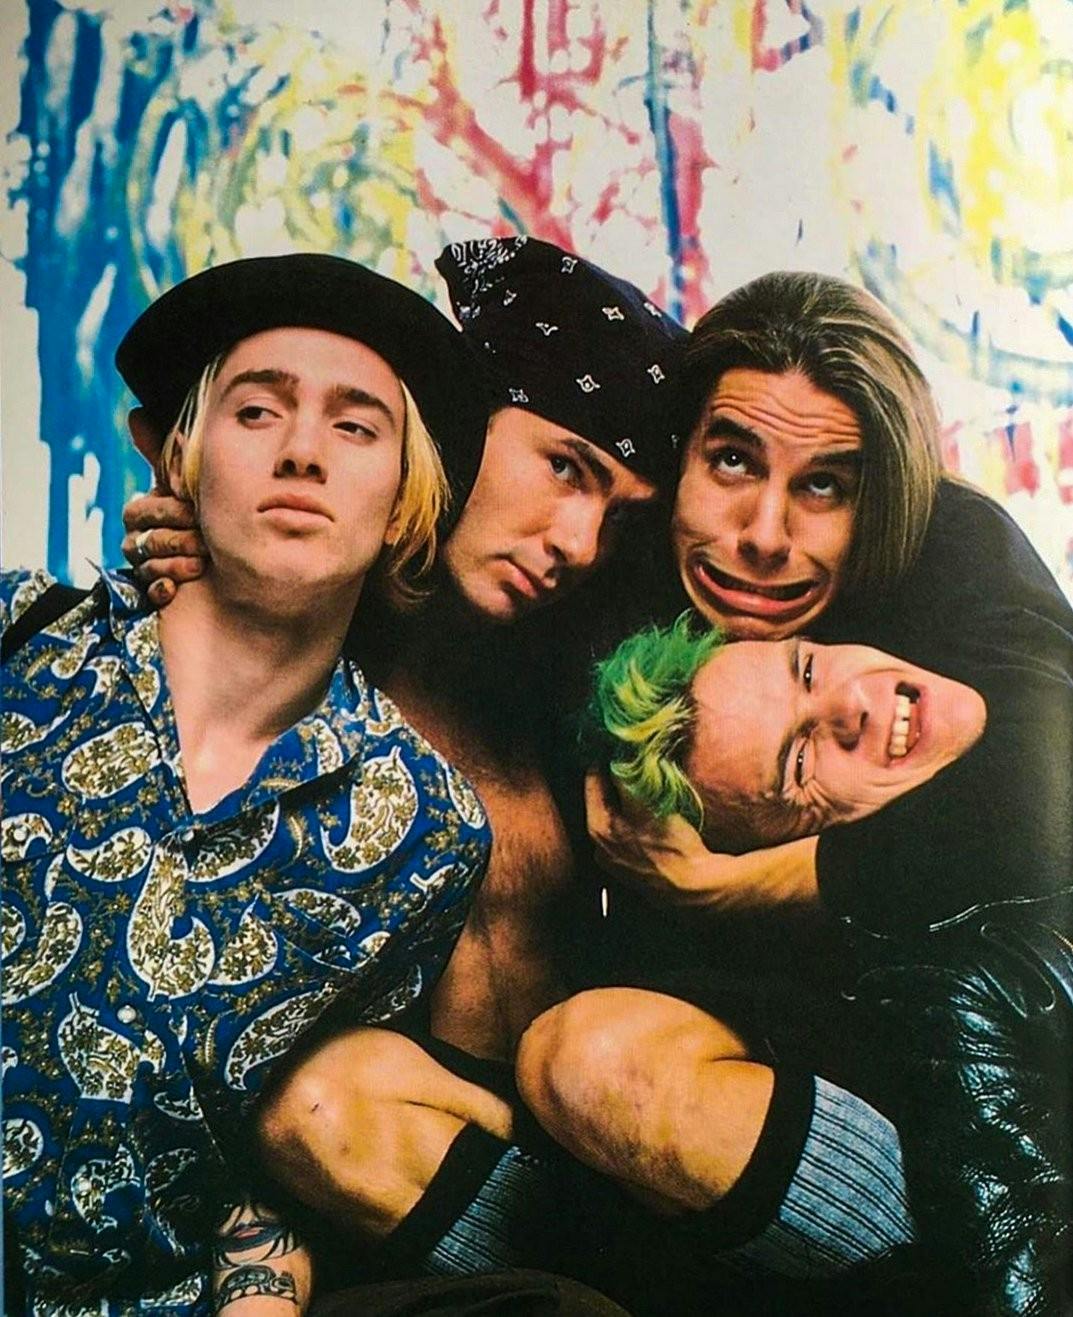 RED HOT CHILI PEPPERS, circa 1989